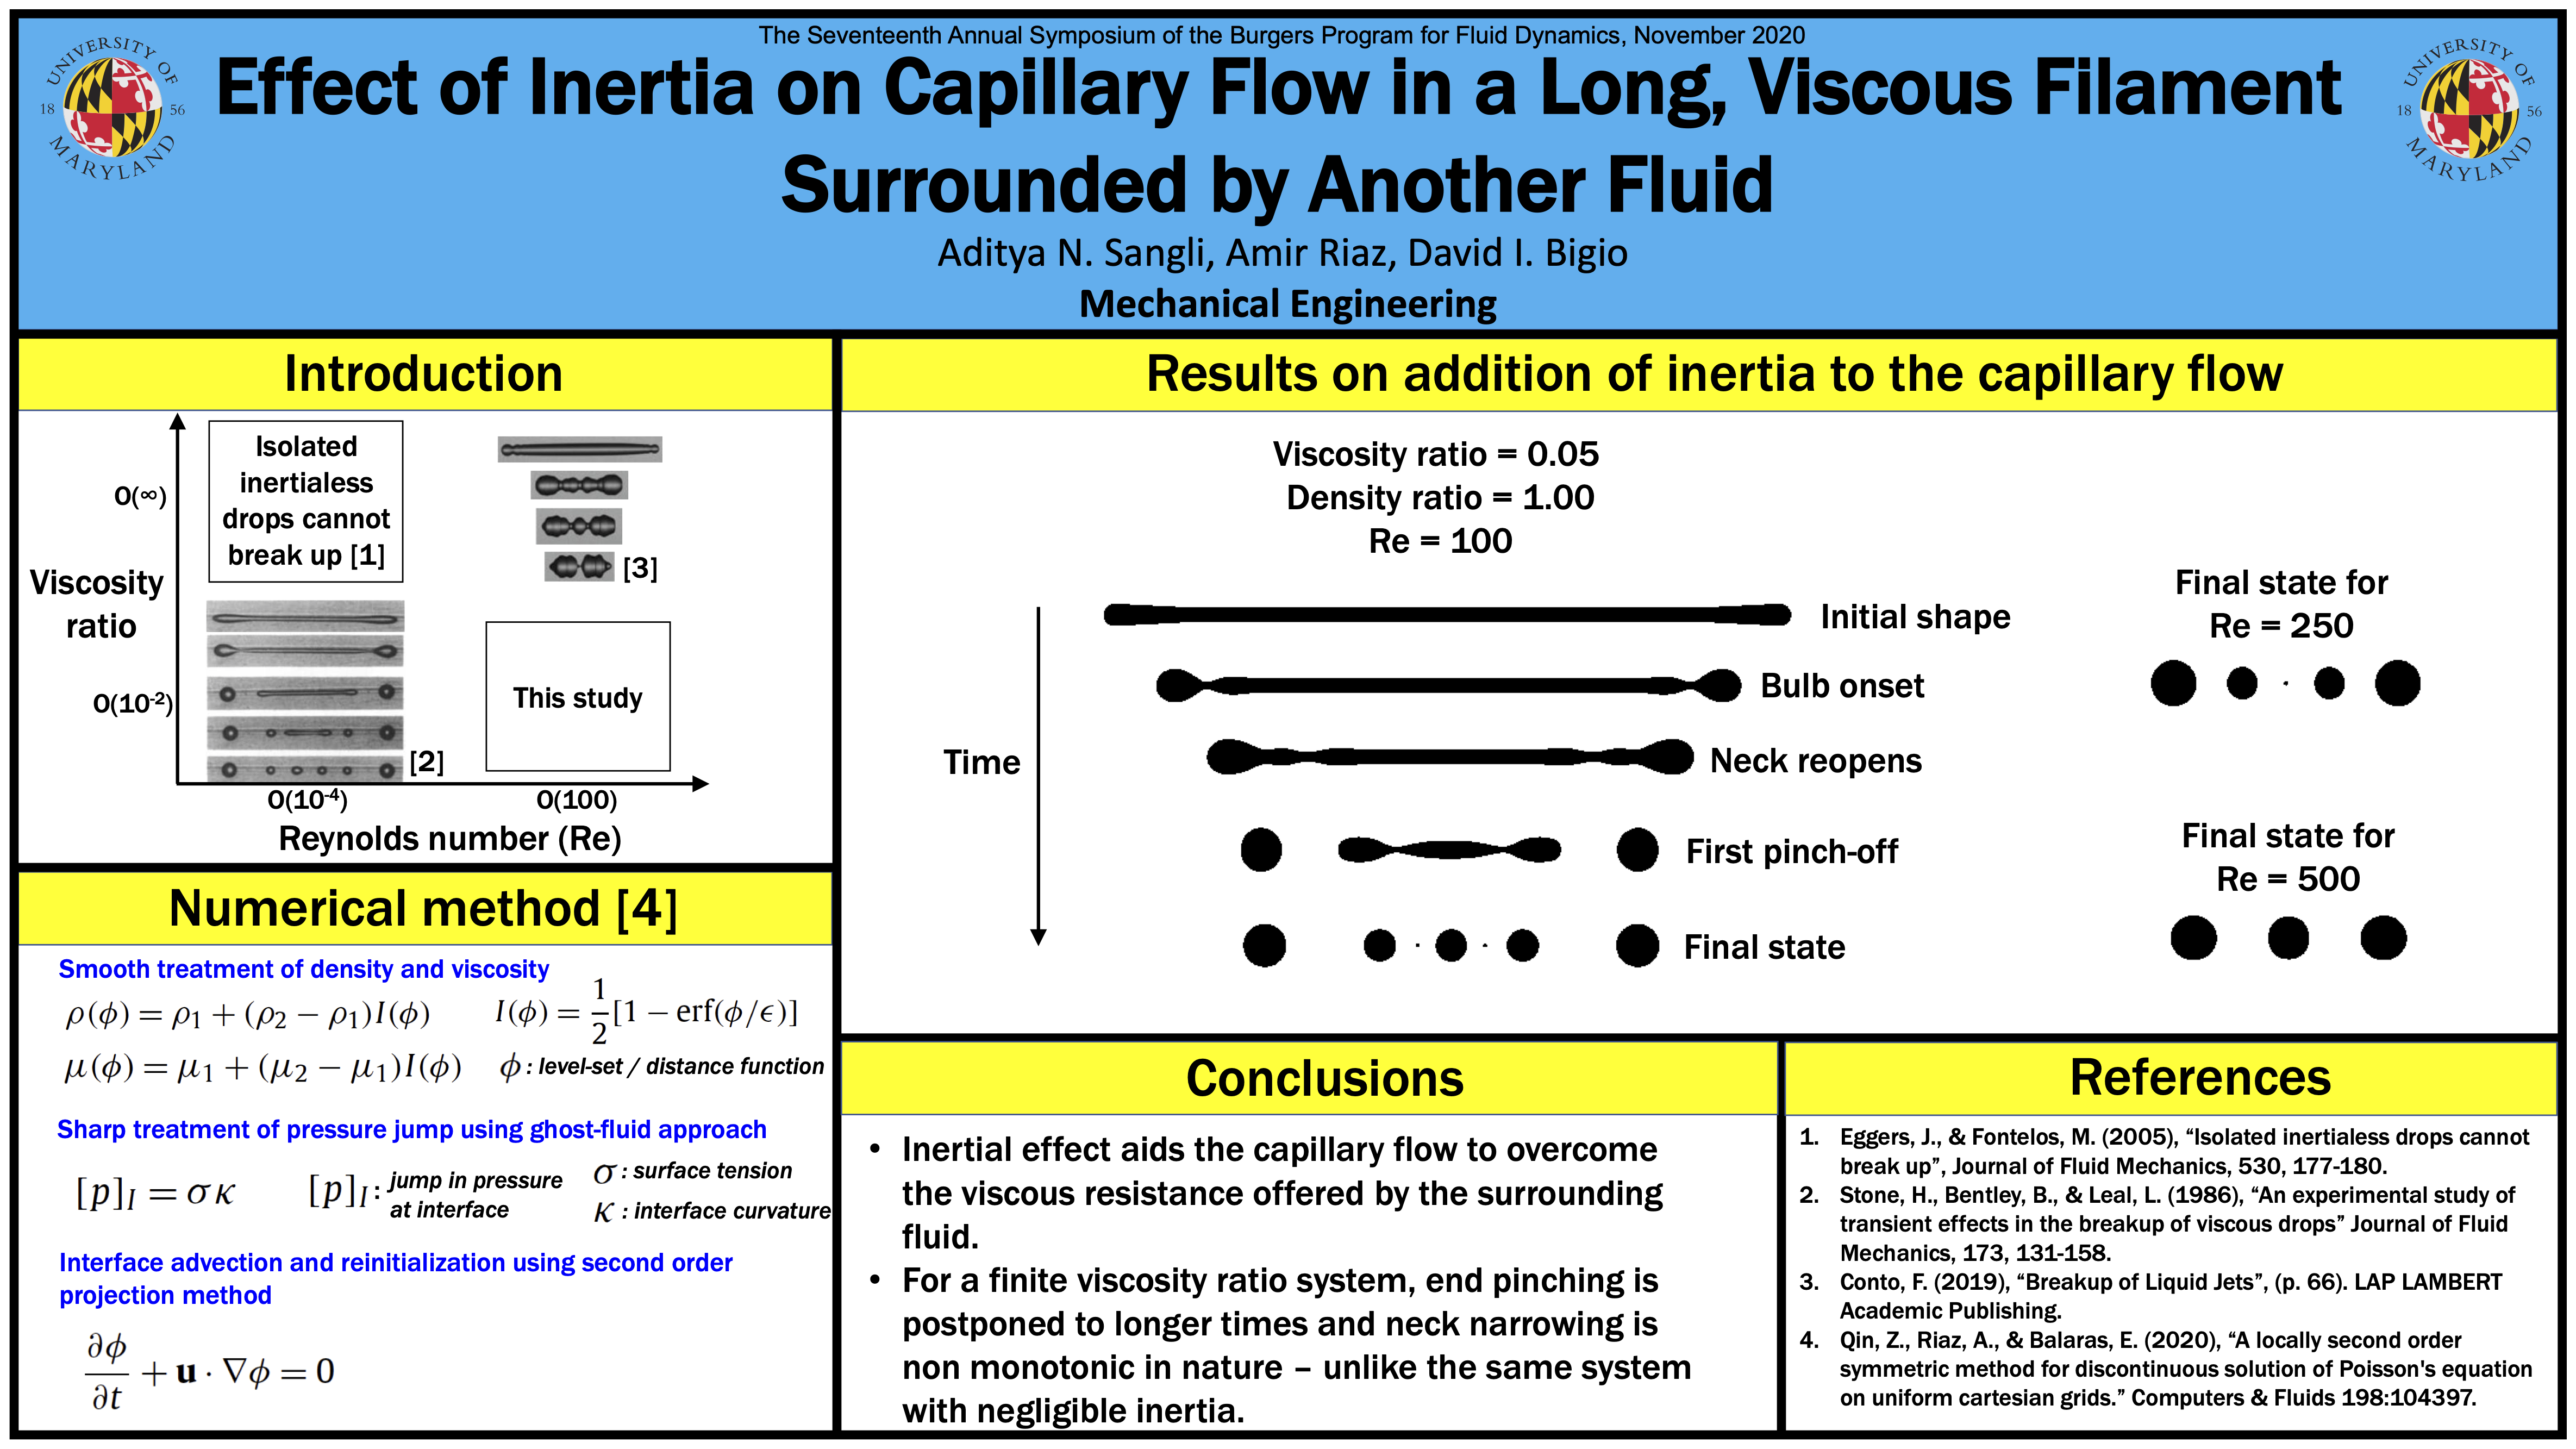 Effect of Inertia on Capillary Flow in a Long, Viscous Filament Surrounded by Another Fluid